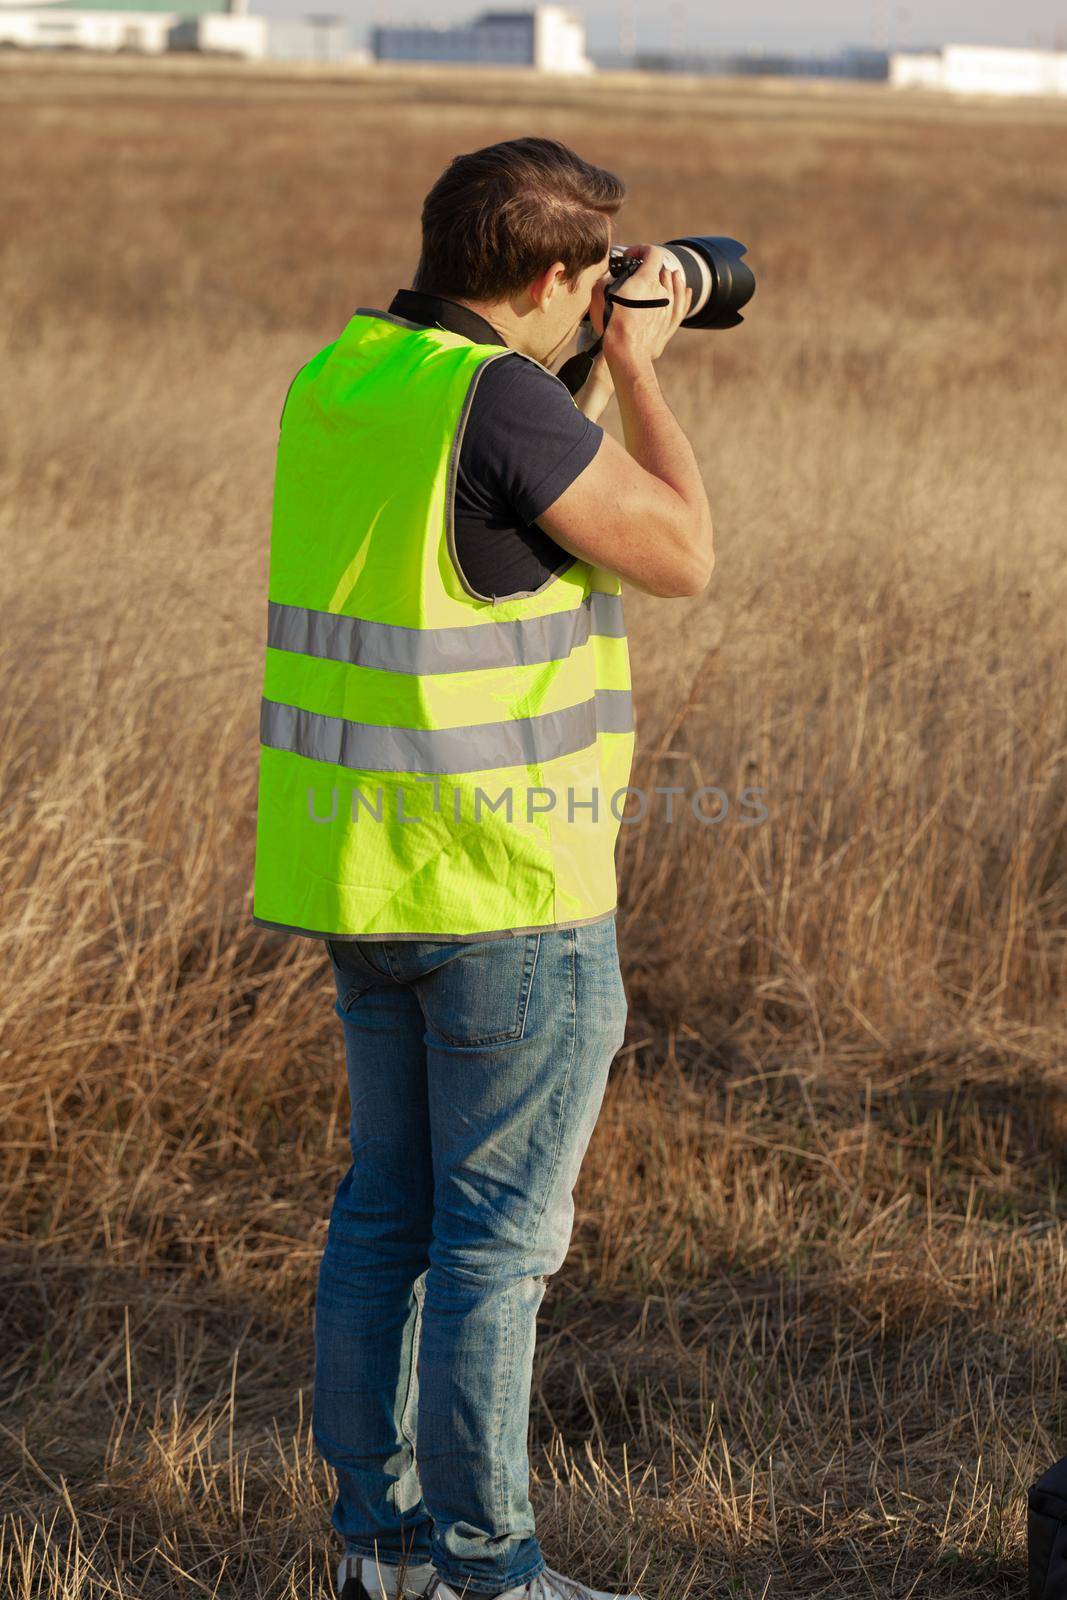 Man in yellow vest does plane spotting at the airport, close up